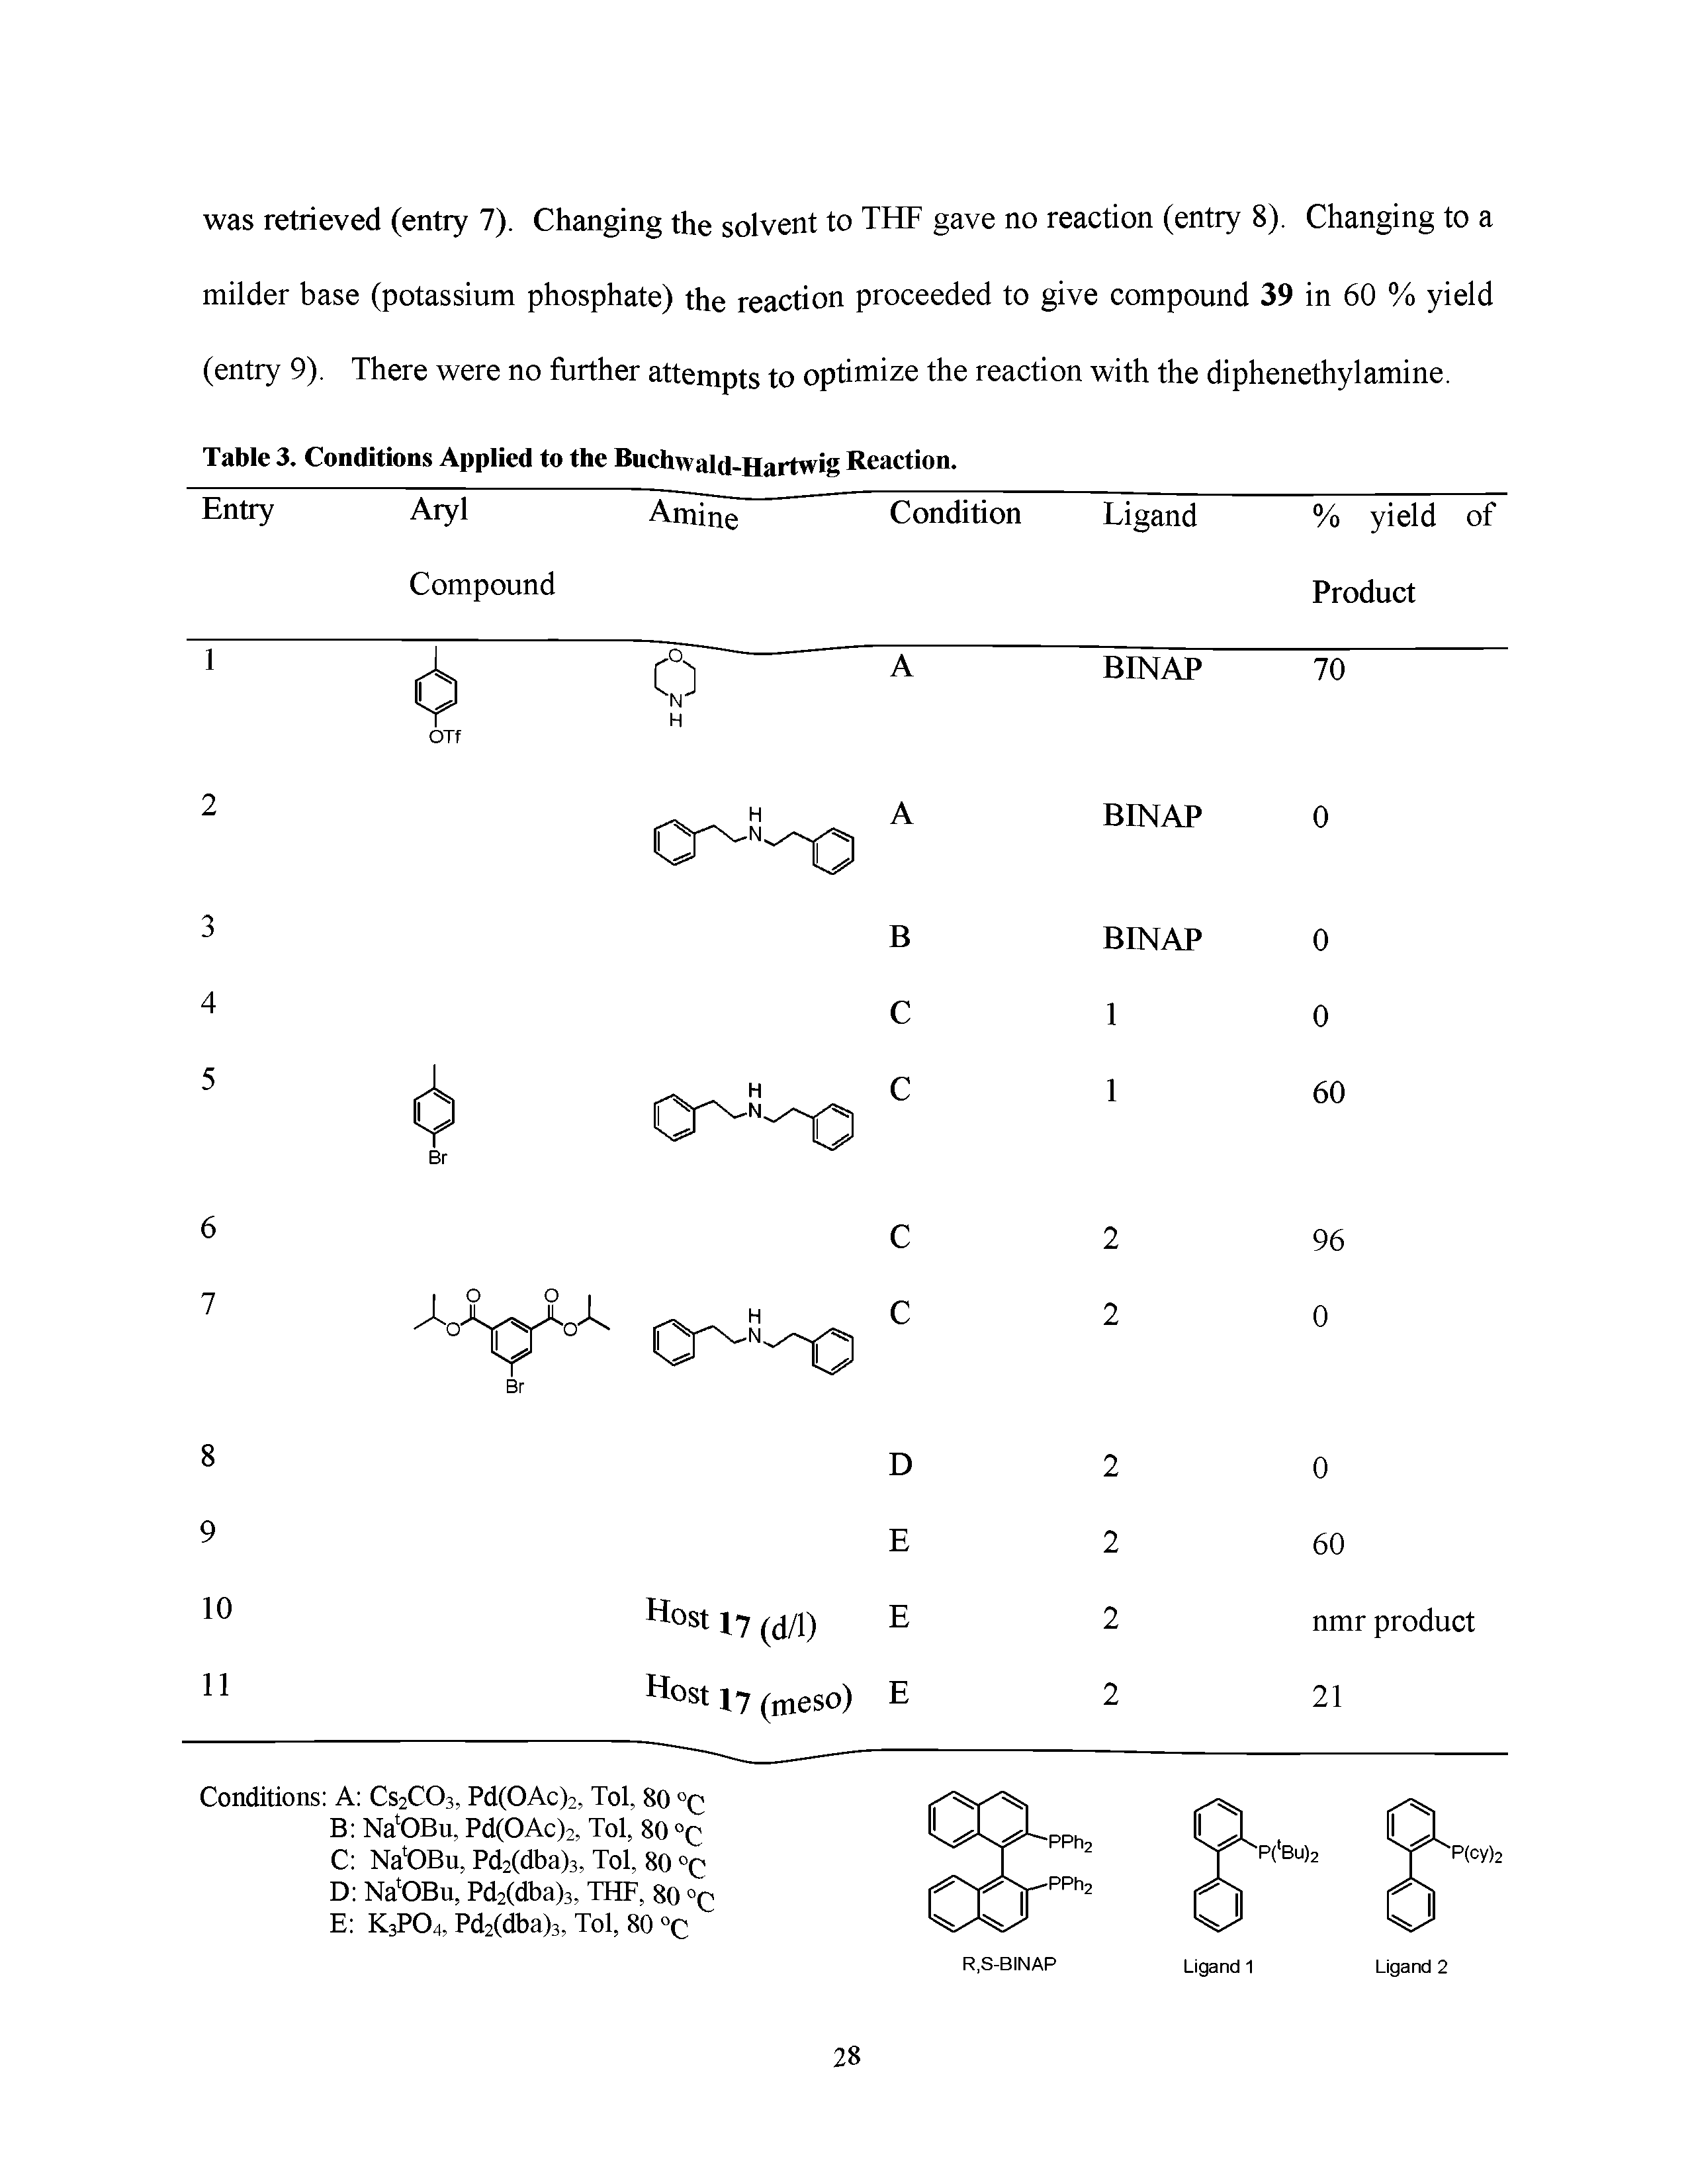 Table 3. Conditions Applied to the Buchwald-Hartwig Reaction.